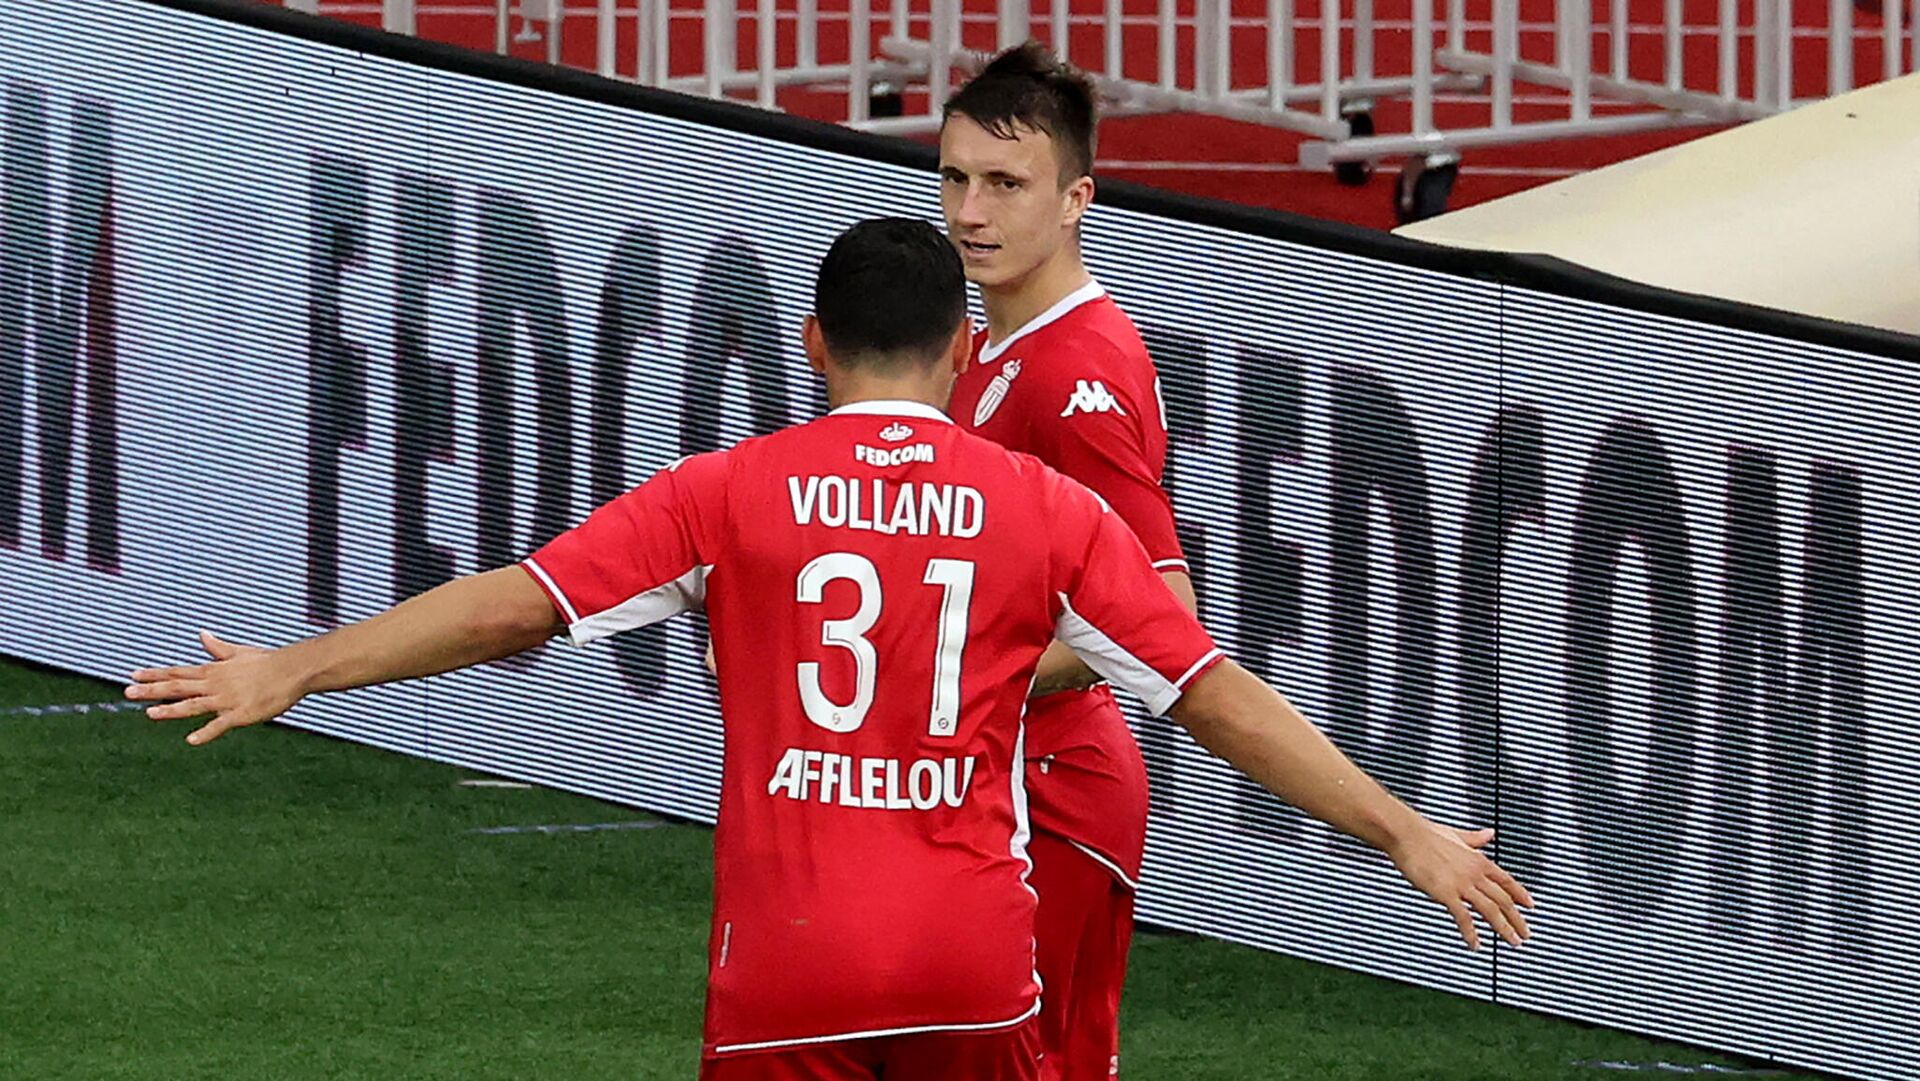 Monaco's Russian midfielder Aleksandr Golovin (R) celebrates with a team mate after scoring a goal during the French L1 football match between Monaco and Bordeaux at the Louis II stadium in Monaco on october 3, 2021. (Photo by Valery HACHE / AFP) - РИА Новости, 1920, 04.11.2021